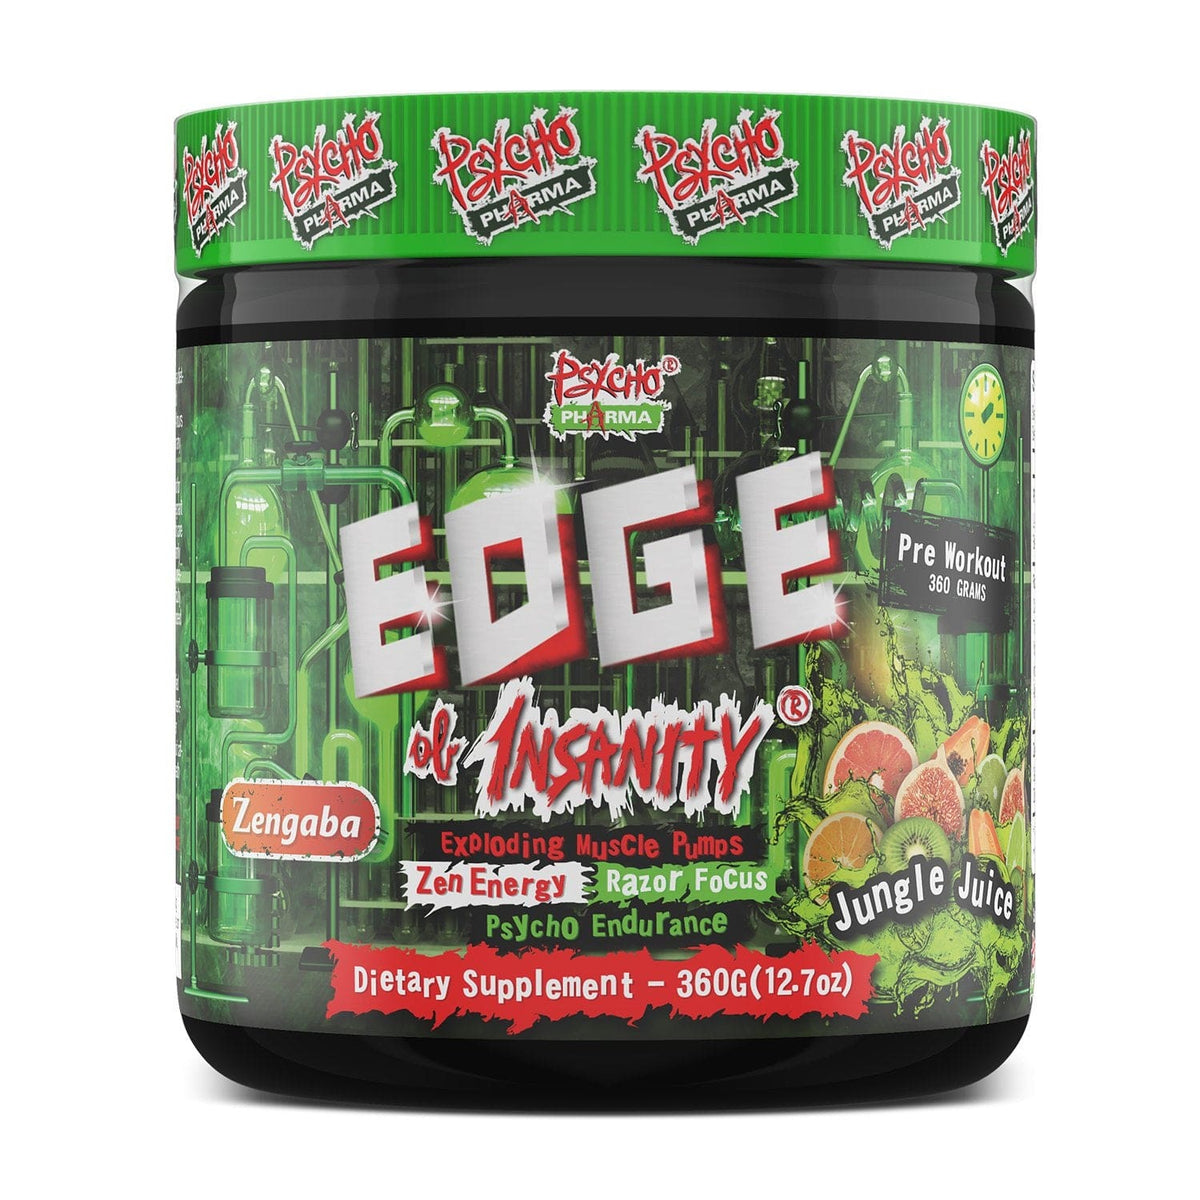 Best Edge of insanity pre workout uk for Women